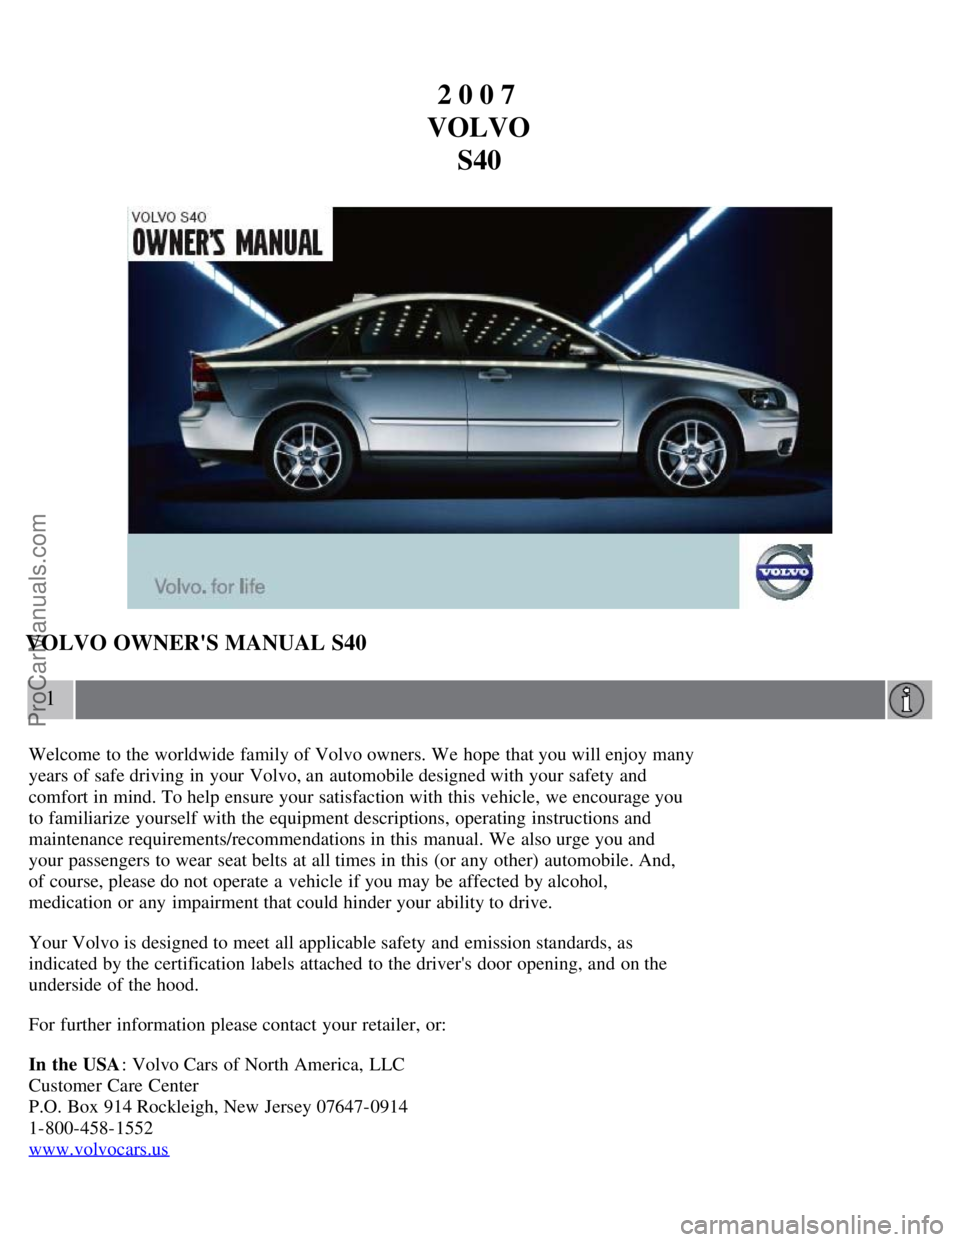 VOLVO S40 2007  Owners Manual 2 0 0 7 
VOLVO S40
VOLVO OWNERS MANUAL S40
1
Welcome to the worldwide family of Volvo owners. We hope  that you will enjoy many
years of safe driving in your Volvo, an  automobile designed with your 